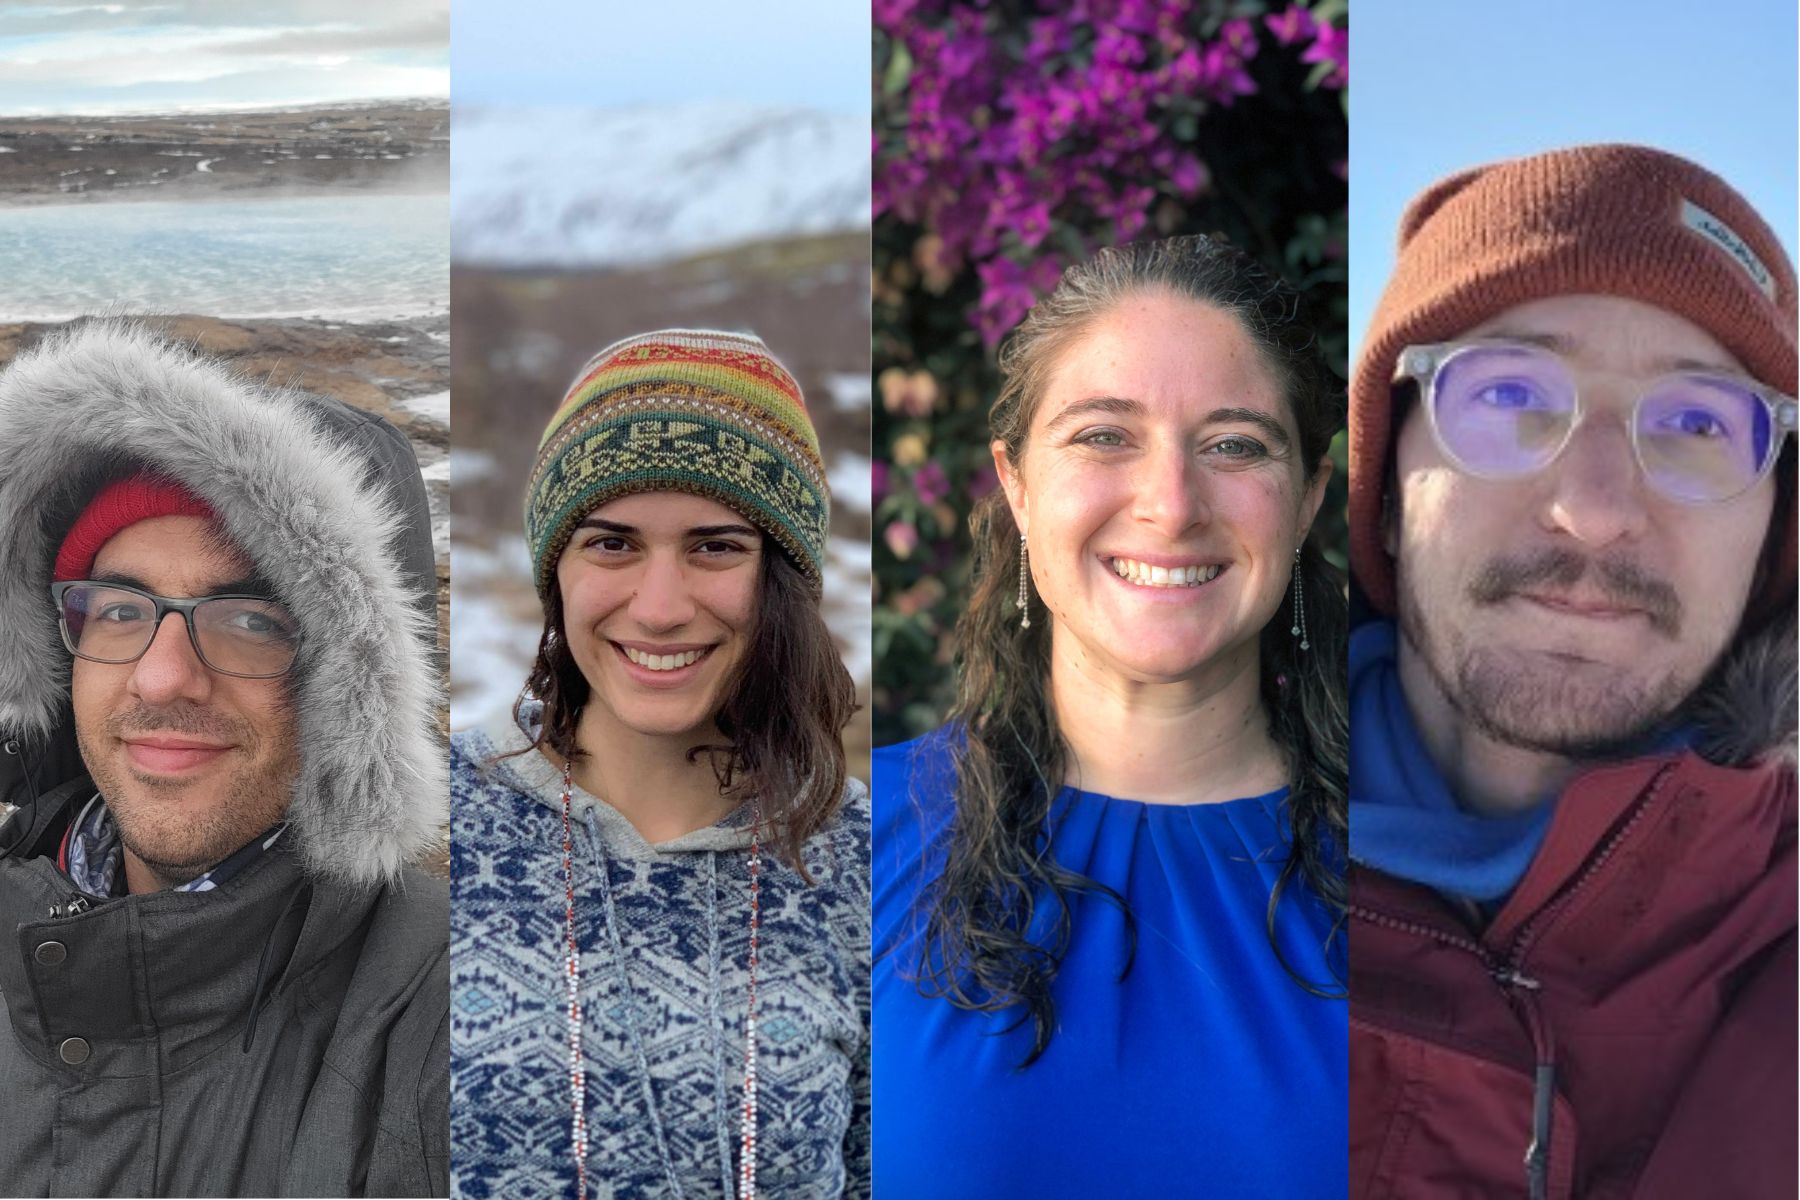 Four early career researchers have been selected to receive Toolik Field Station's Tundra Award.